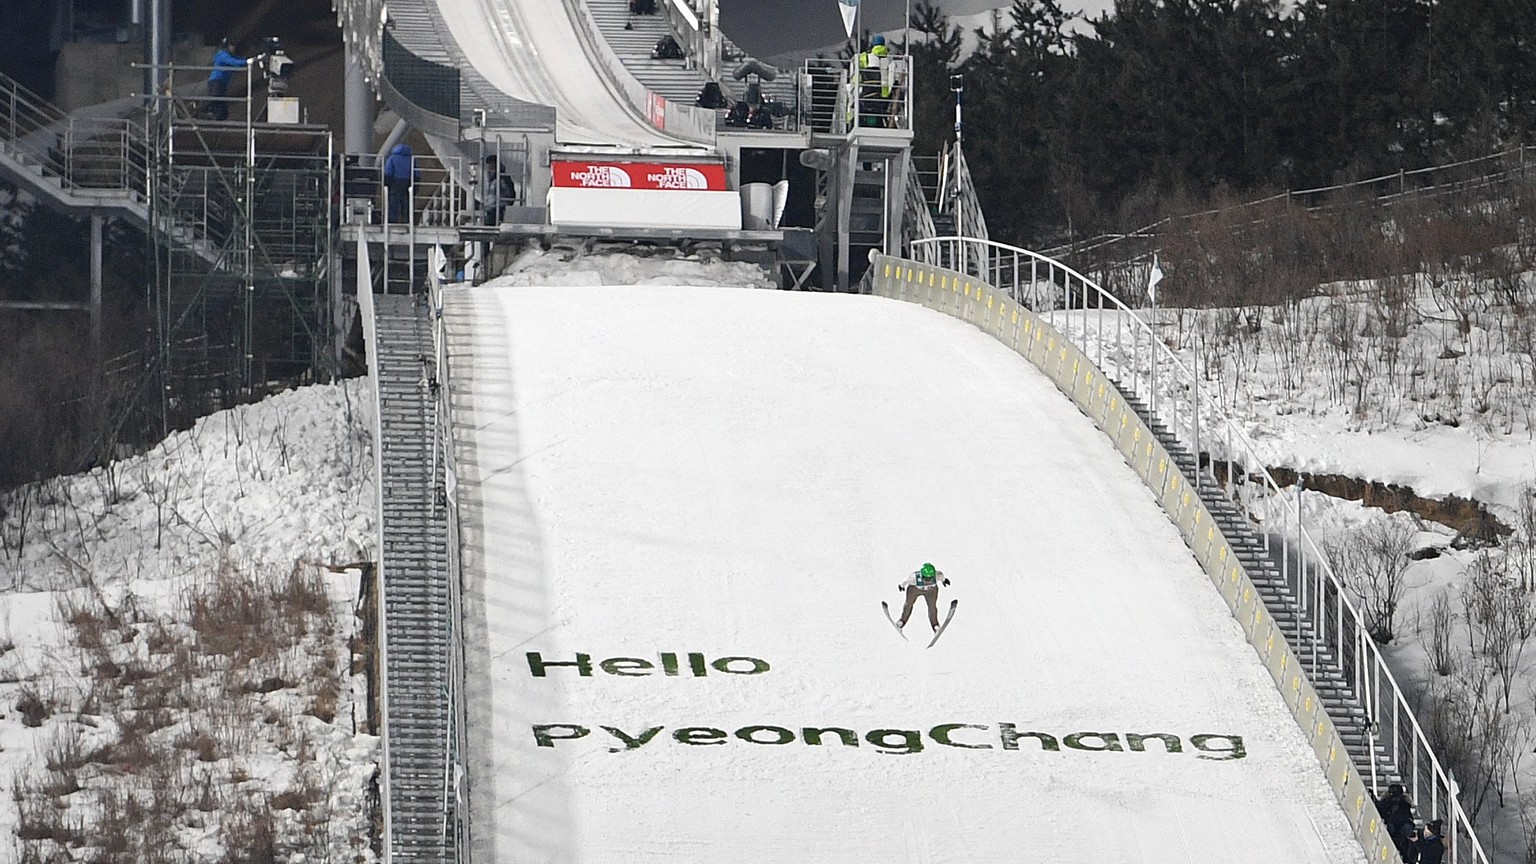 epa05795961 A general view of the ski jumping centre at Alpensia, in Pyeongchang, South Korea, 15 February 2017 (issued 16 February 2017). Alpensia will host Ski Jumping, Sliding, Cross Country and Bi ...